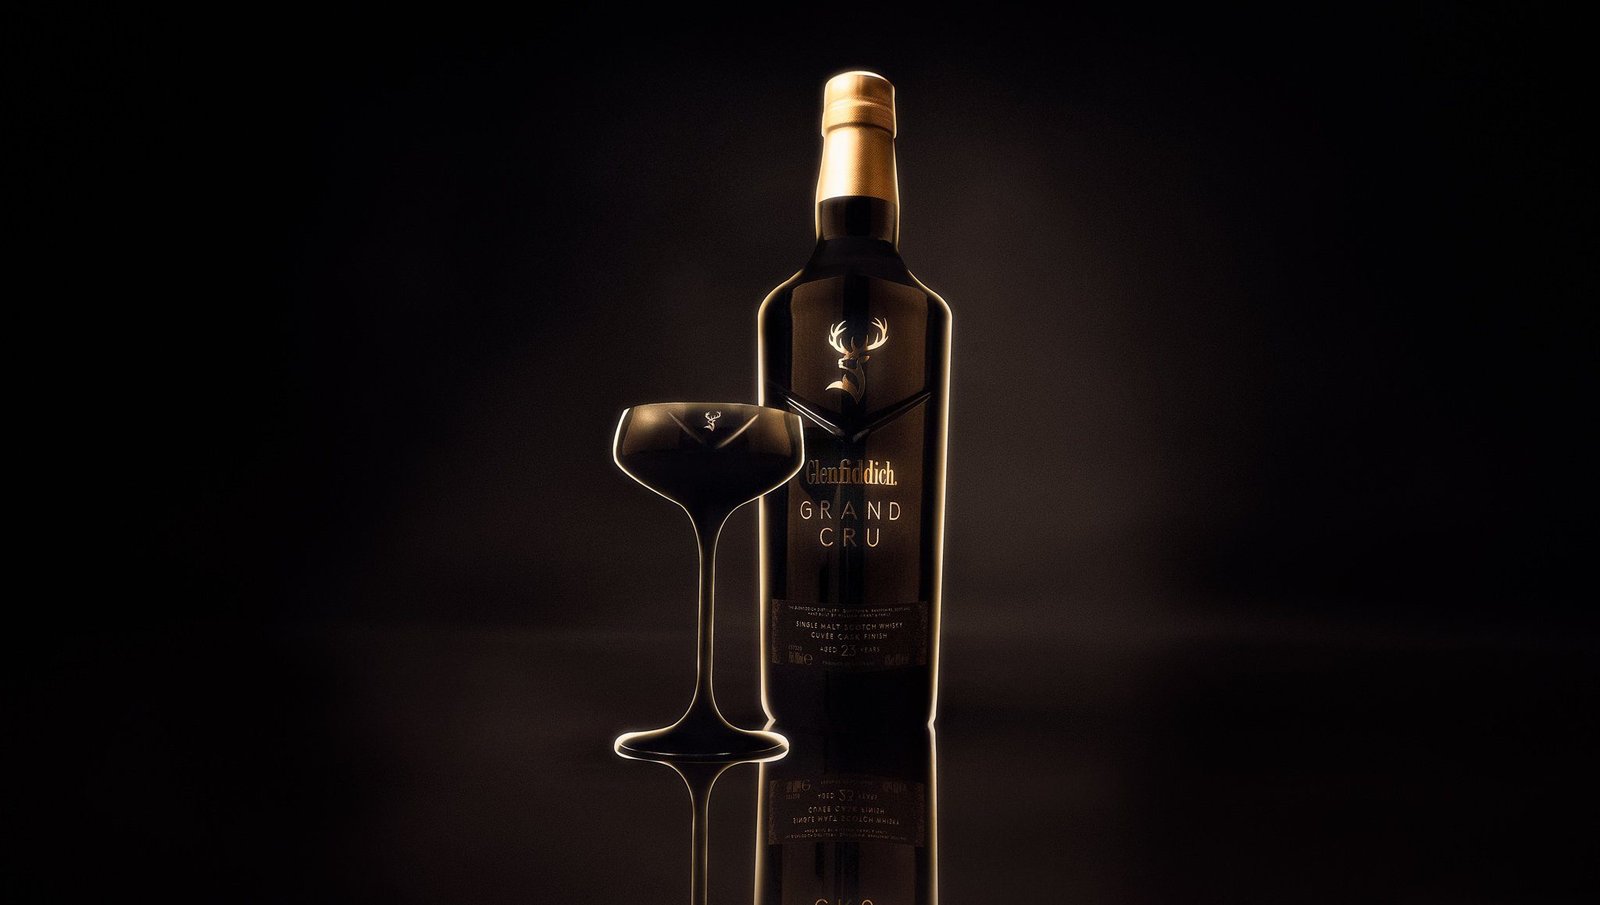 Glenfiddich Grand Cru Official Product Photos by AX Creative